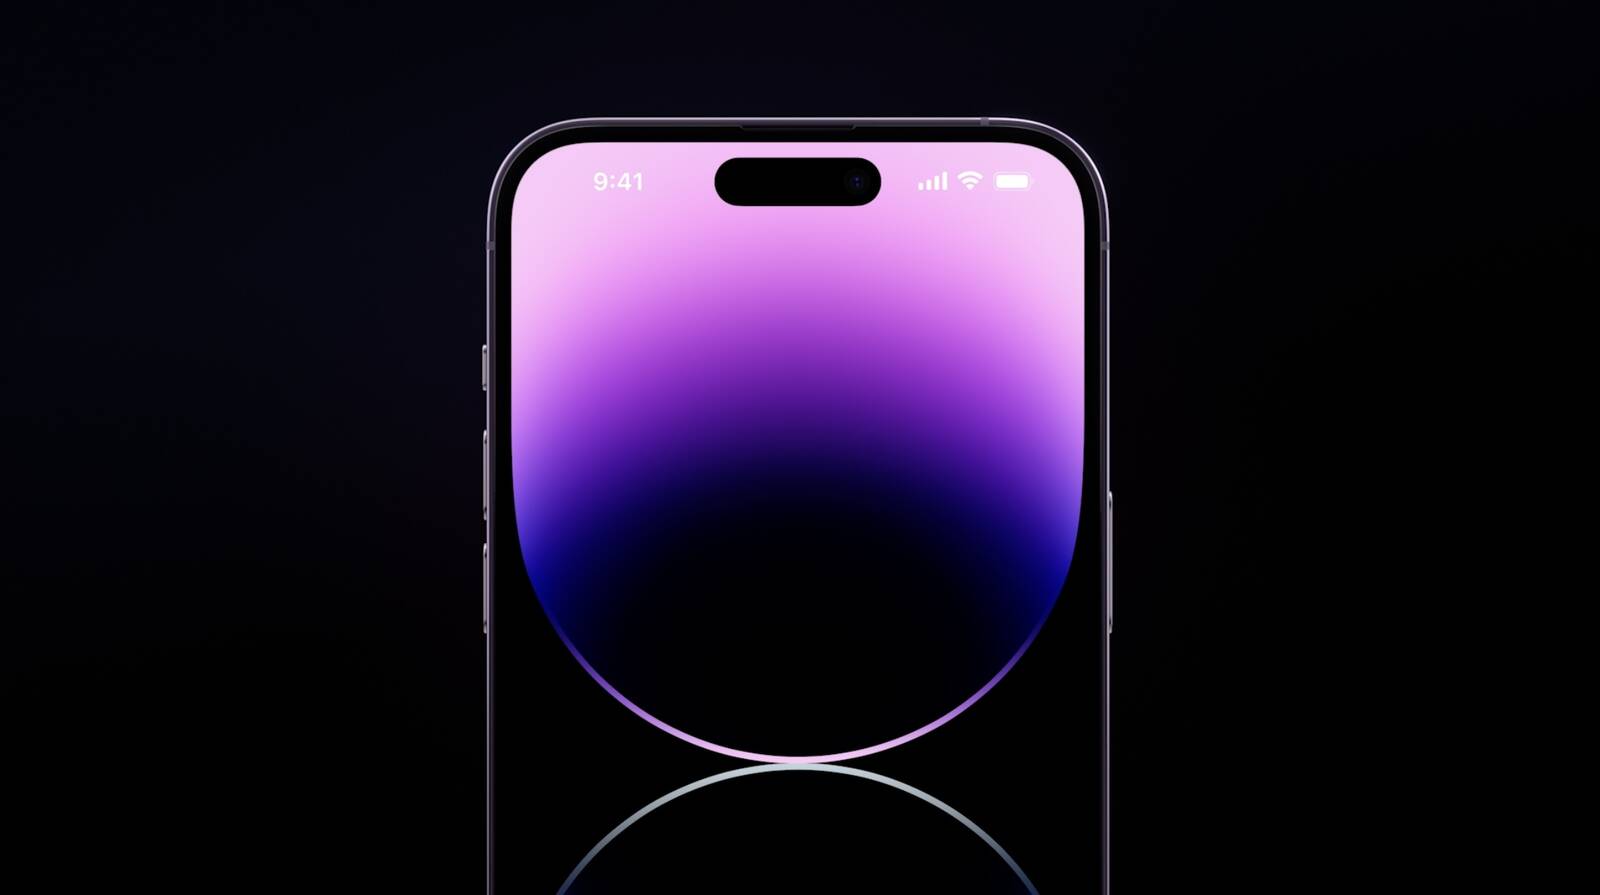 A look at iPhone 14 Pro's new Dynamic Island pill-shaped notch, which has custom UI elements for incoming phone calls, timers, turn-by-turn navigation, and more (Joe Rossignol/MacRumors)